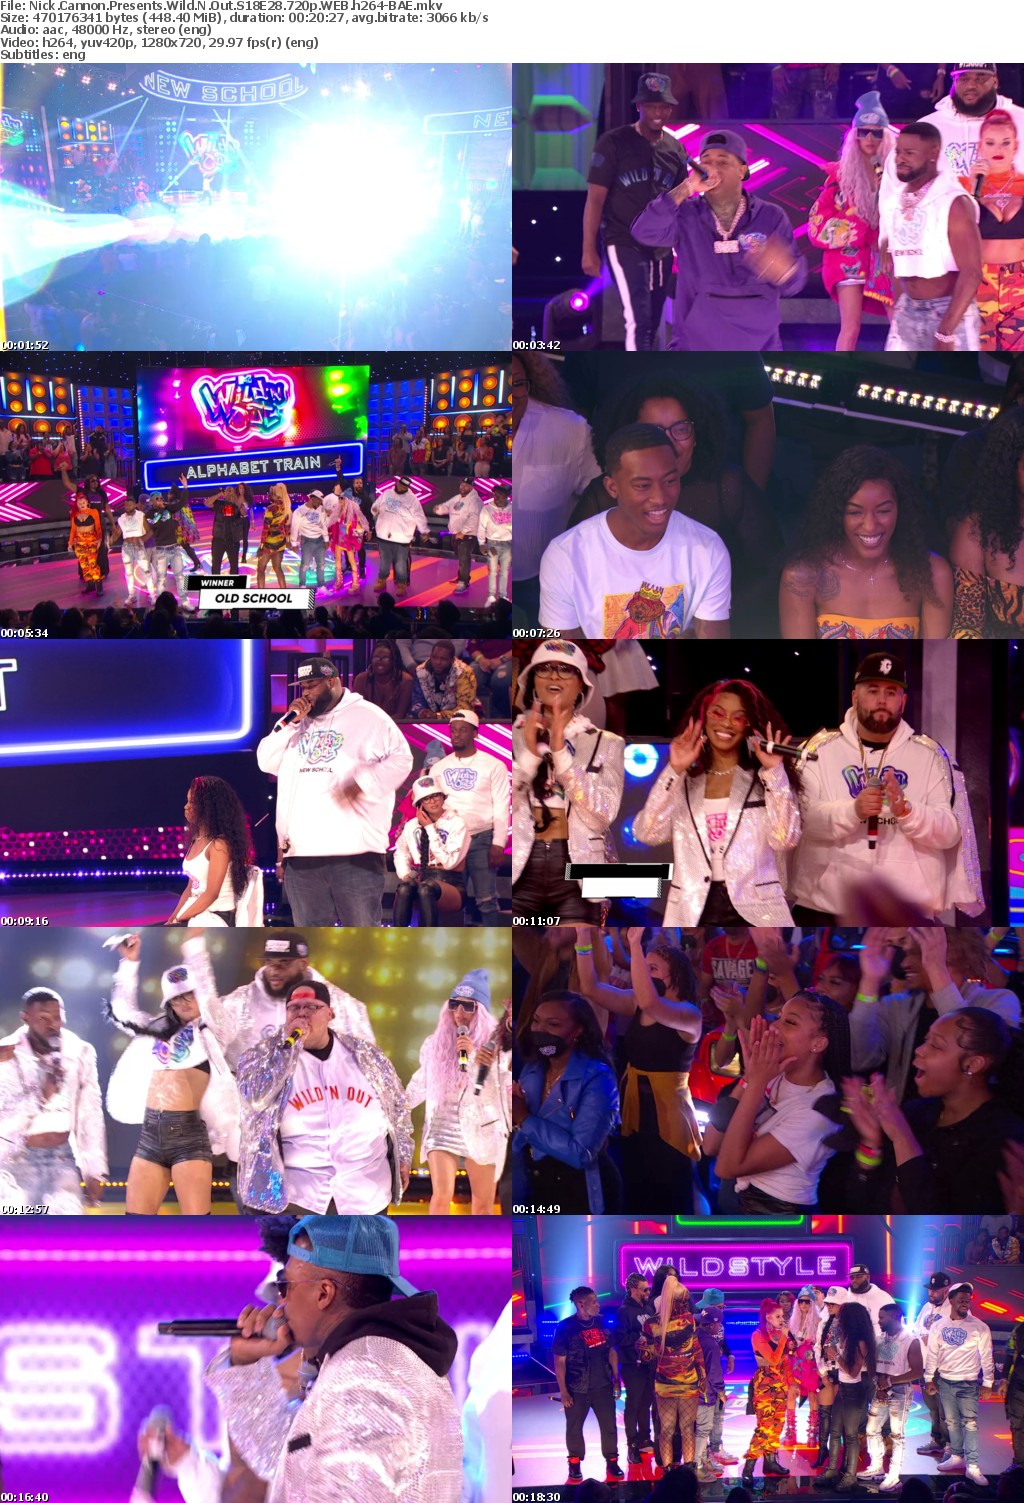 Nick Cannon Presents Wild N Out S18E28 720p WEB h264-BAE